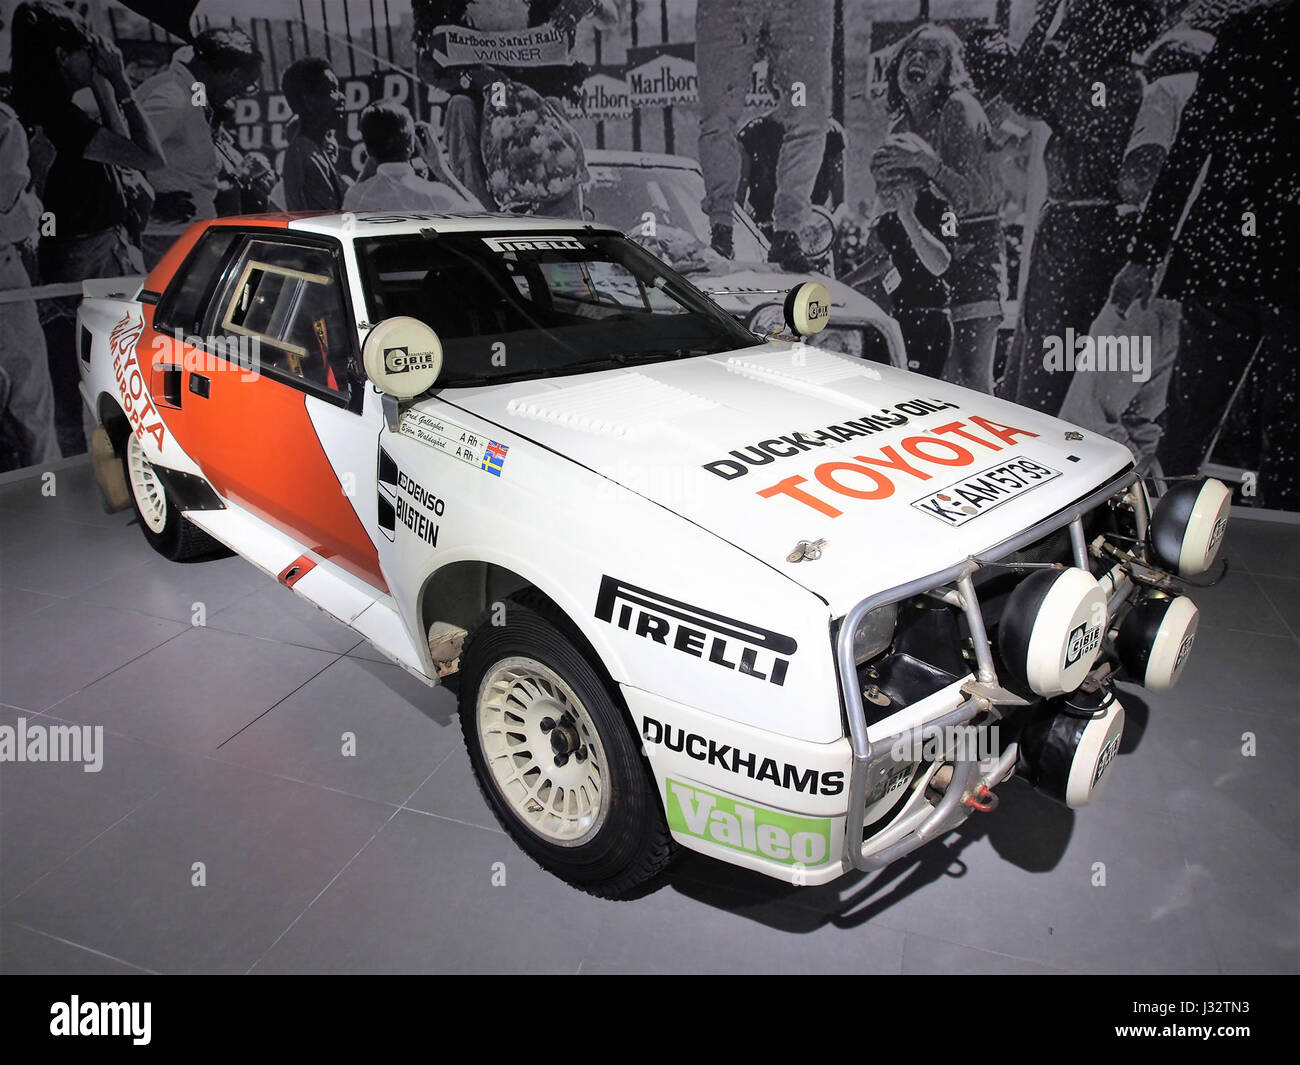 1983 Toyota Celica Coupe GT-TS TwinCam Turbo Group B Rally Car 370kmh 4cylinder 2.1litre photo1 Stock Photo